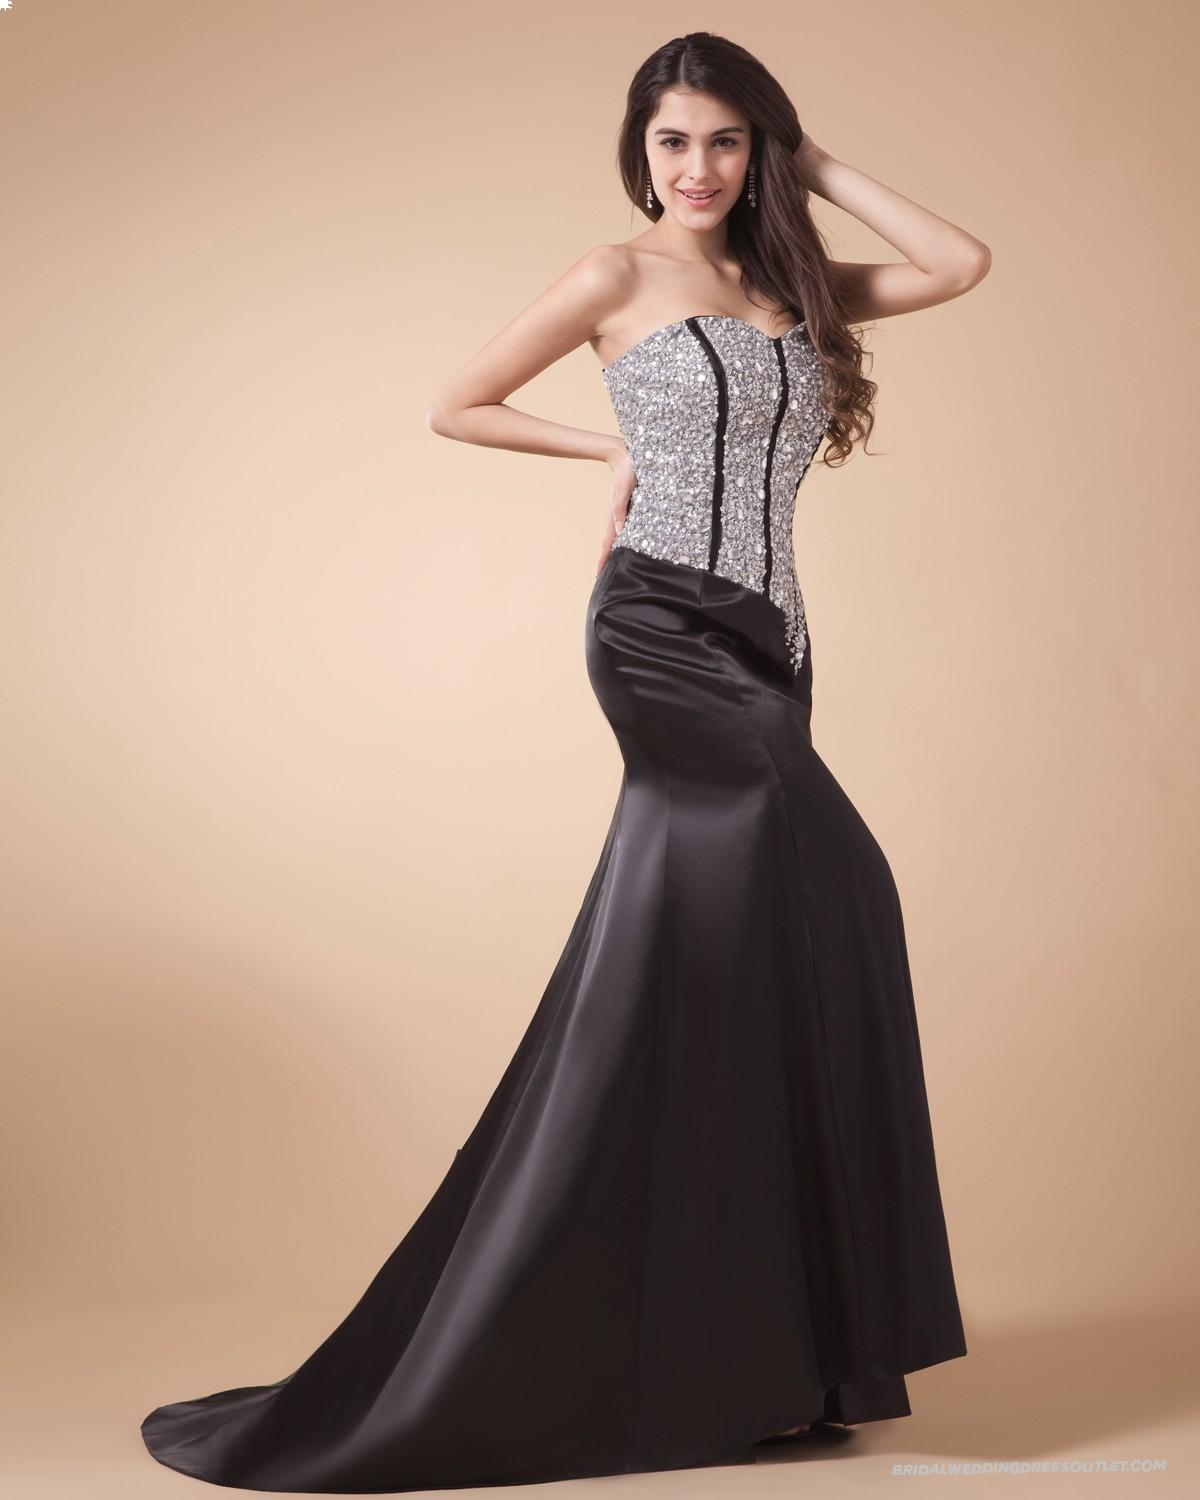 Sexy Prom Dresses 2014 The Hairs